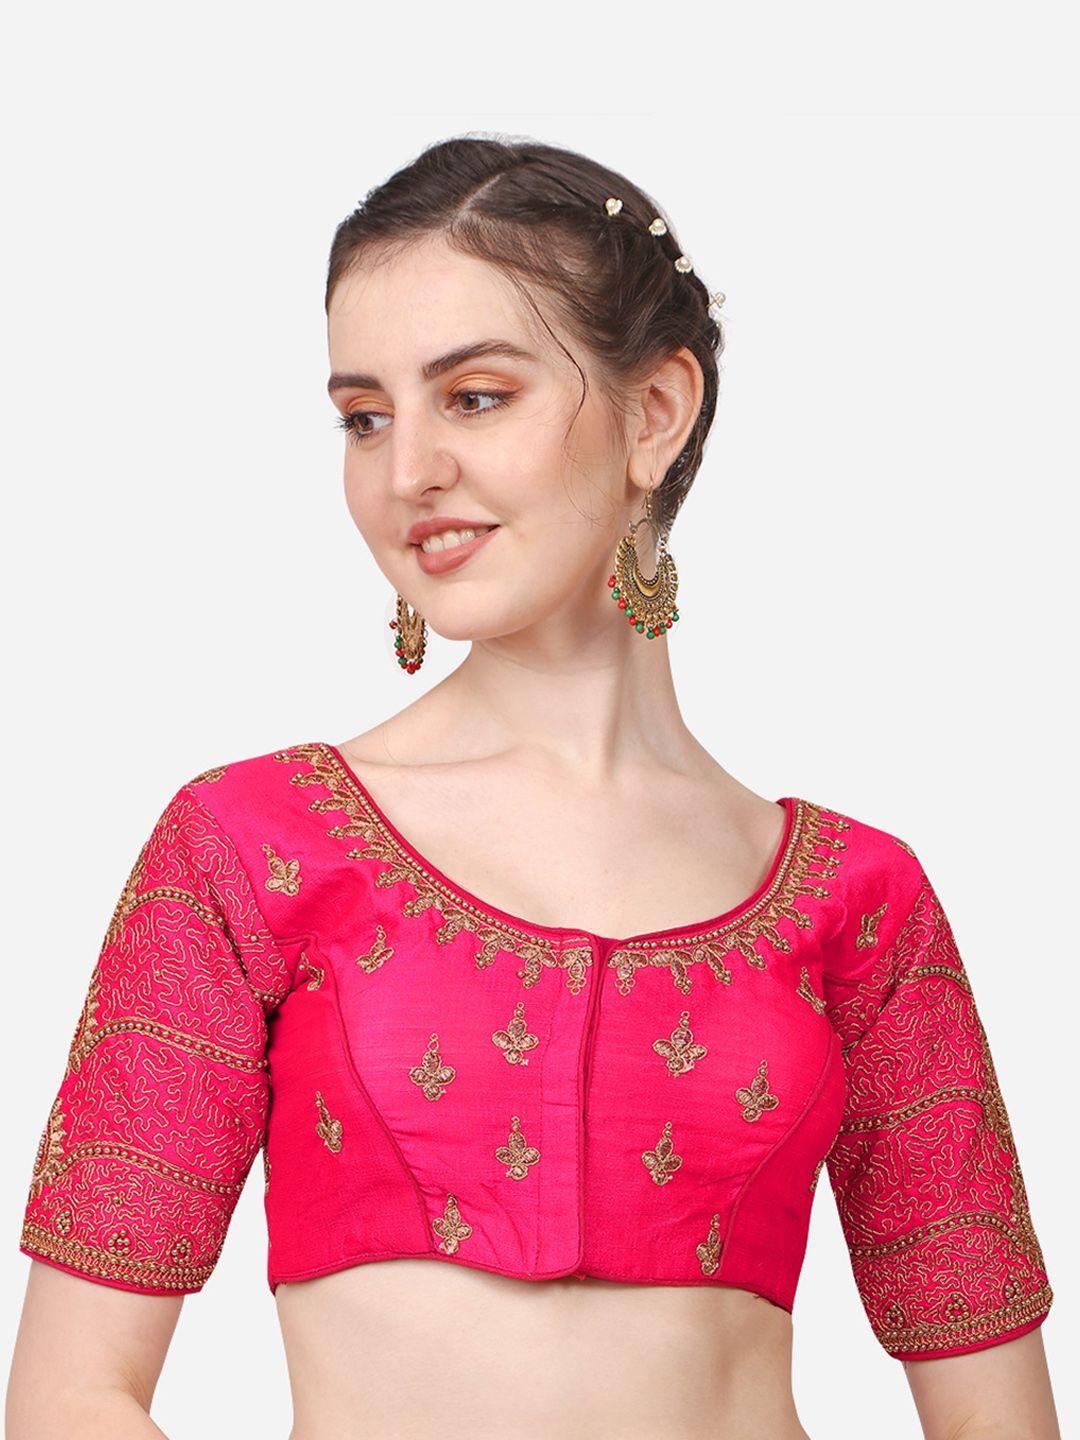 pujia mills pink embroidered saree blouse